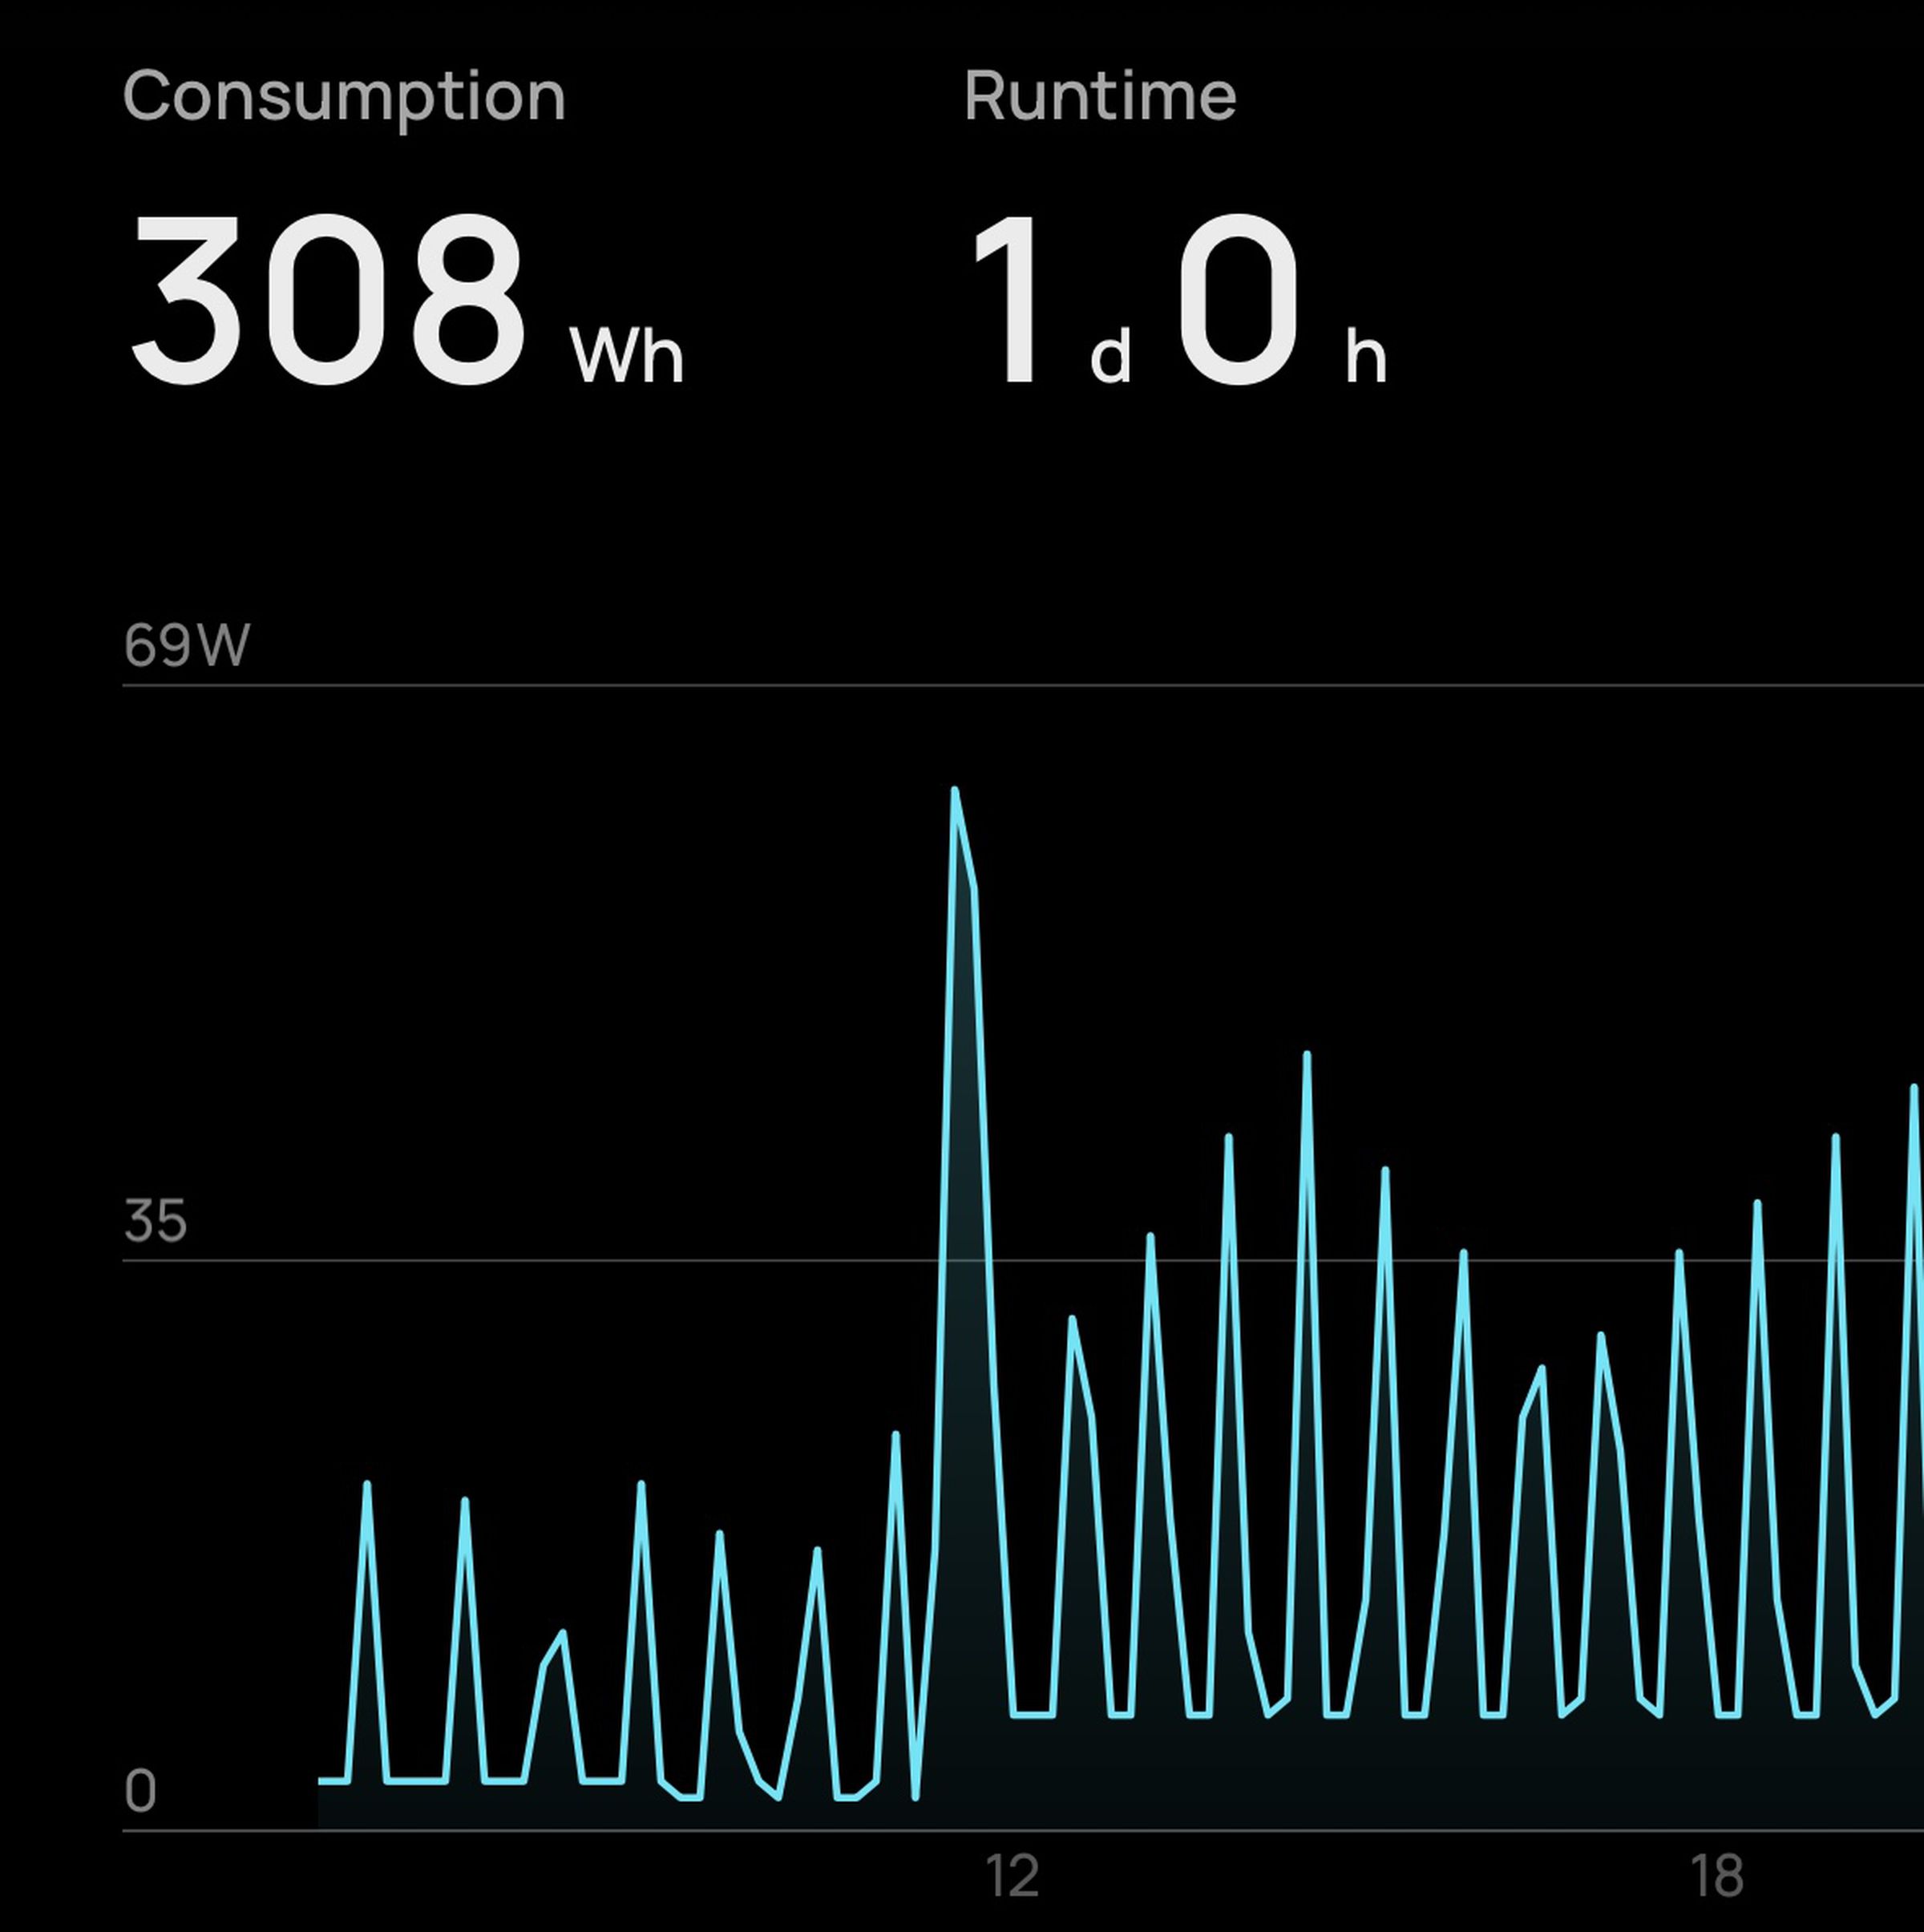 Smart plug visualization showing the MultiCooler operating as a refrigerator before 11AM and freezer after. Each power spike corresponds to the compressor coming on to cool the device. It used 308Wh from the wall jack on this particular day.